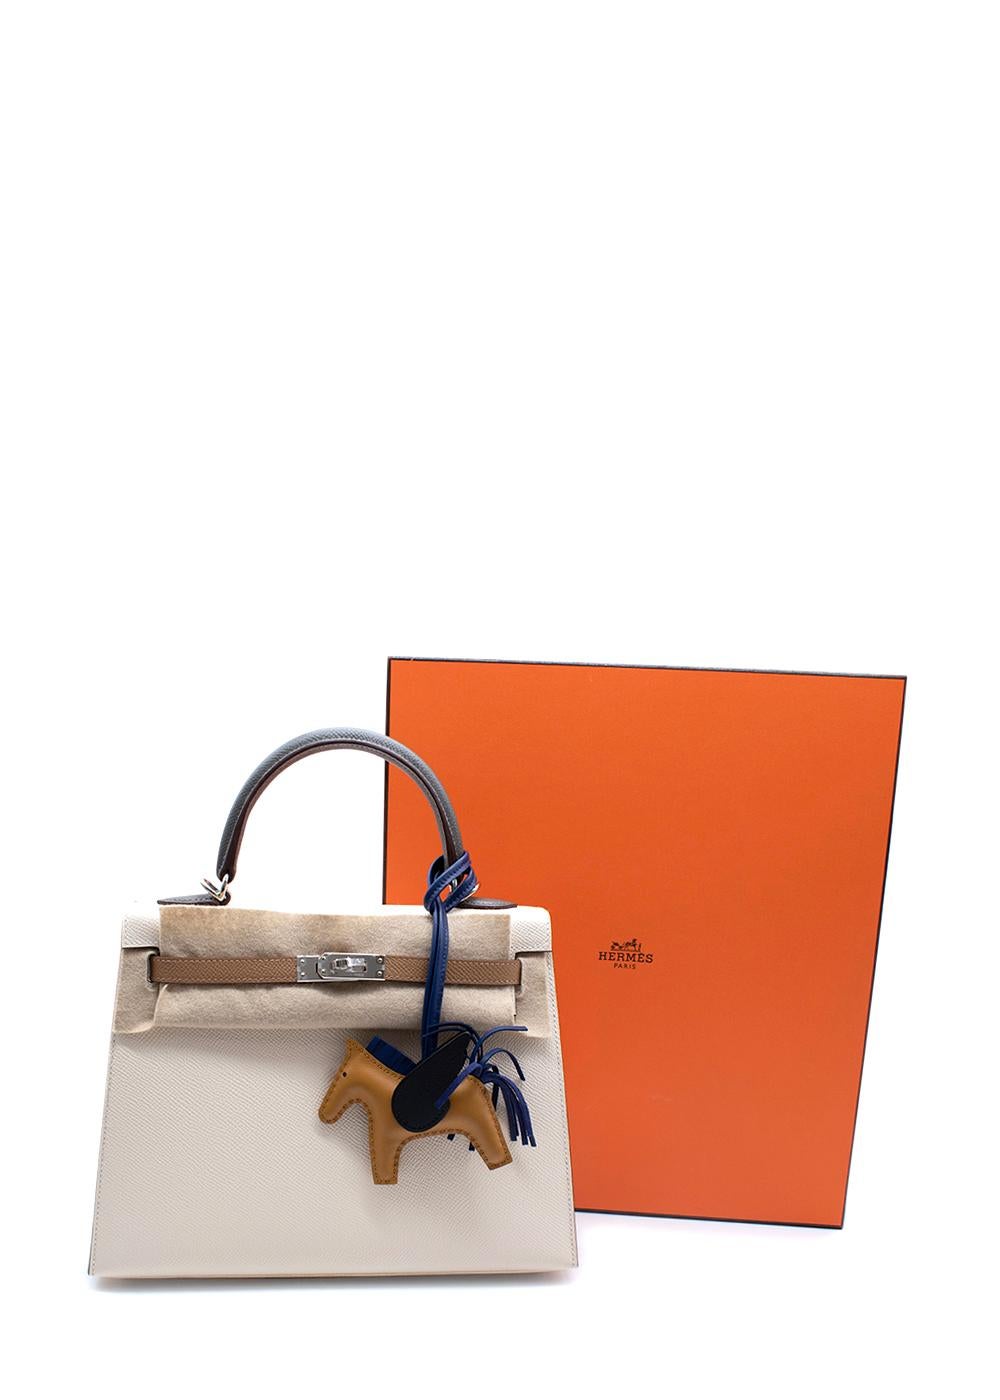 Hermes Epsom Leather Craie & Etain HSS Mini Kelly 20 PBHW

- Super chic mini itineration of the Kelly bag
- Rodeo PM charm in supple leather attached 
- Crafted in Epsom leather accentuated with Palladium hardware
- Comes with a signature Hermes box